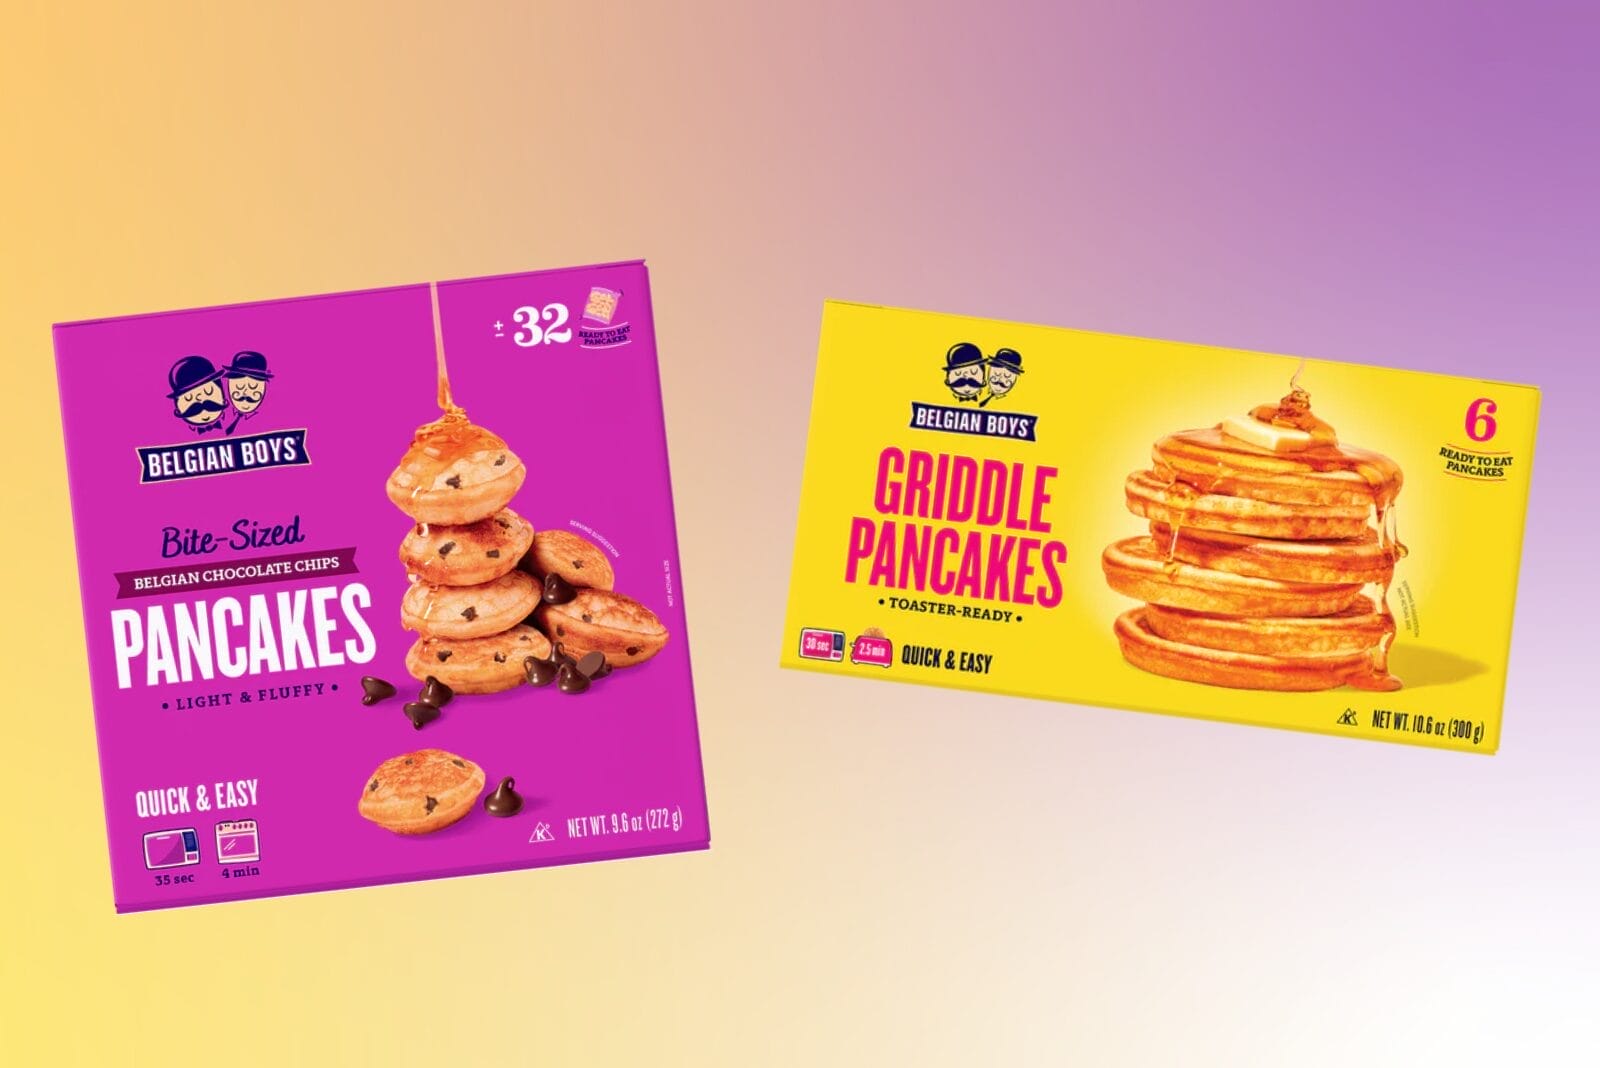 New Belgian Boys products, Griddle Pancakes and Bite-Sized Belgian Chocolate Chip Pancakes, with a gradient background